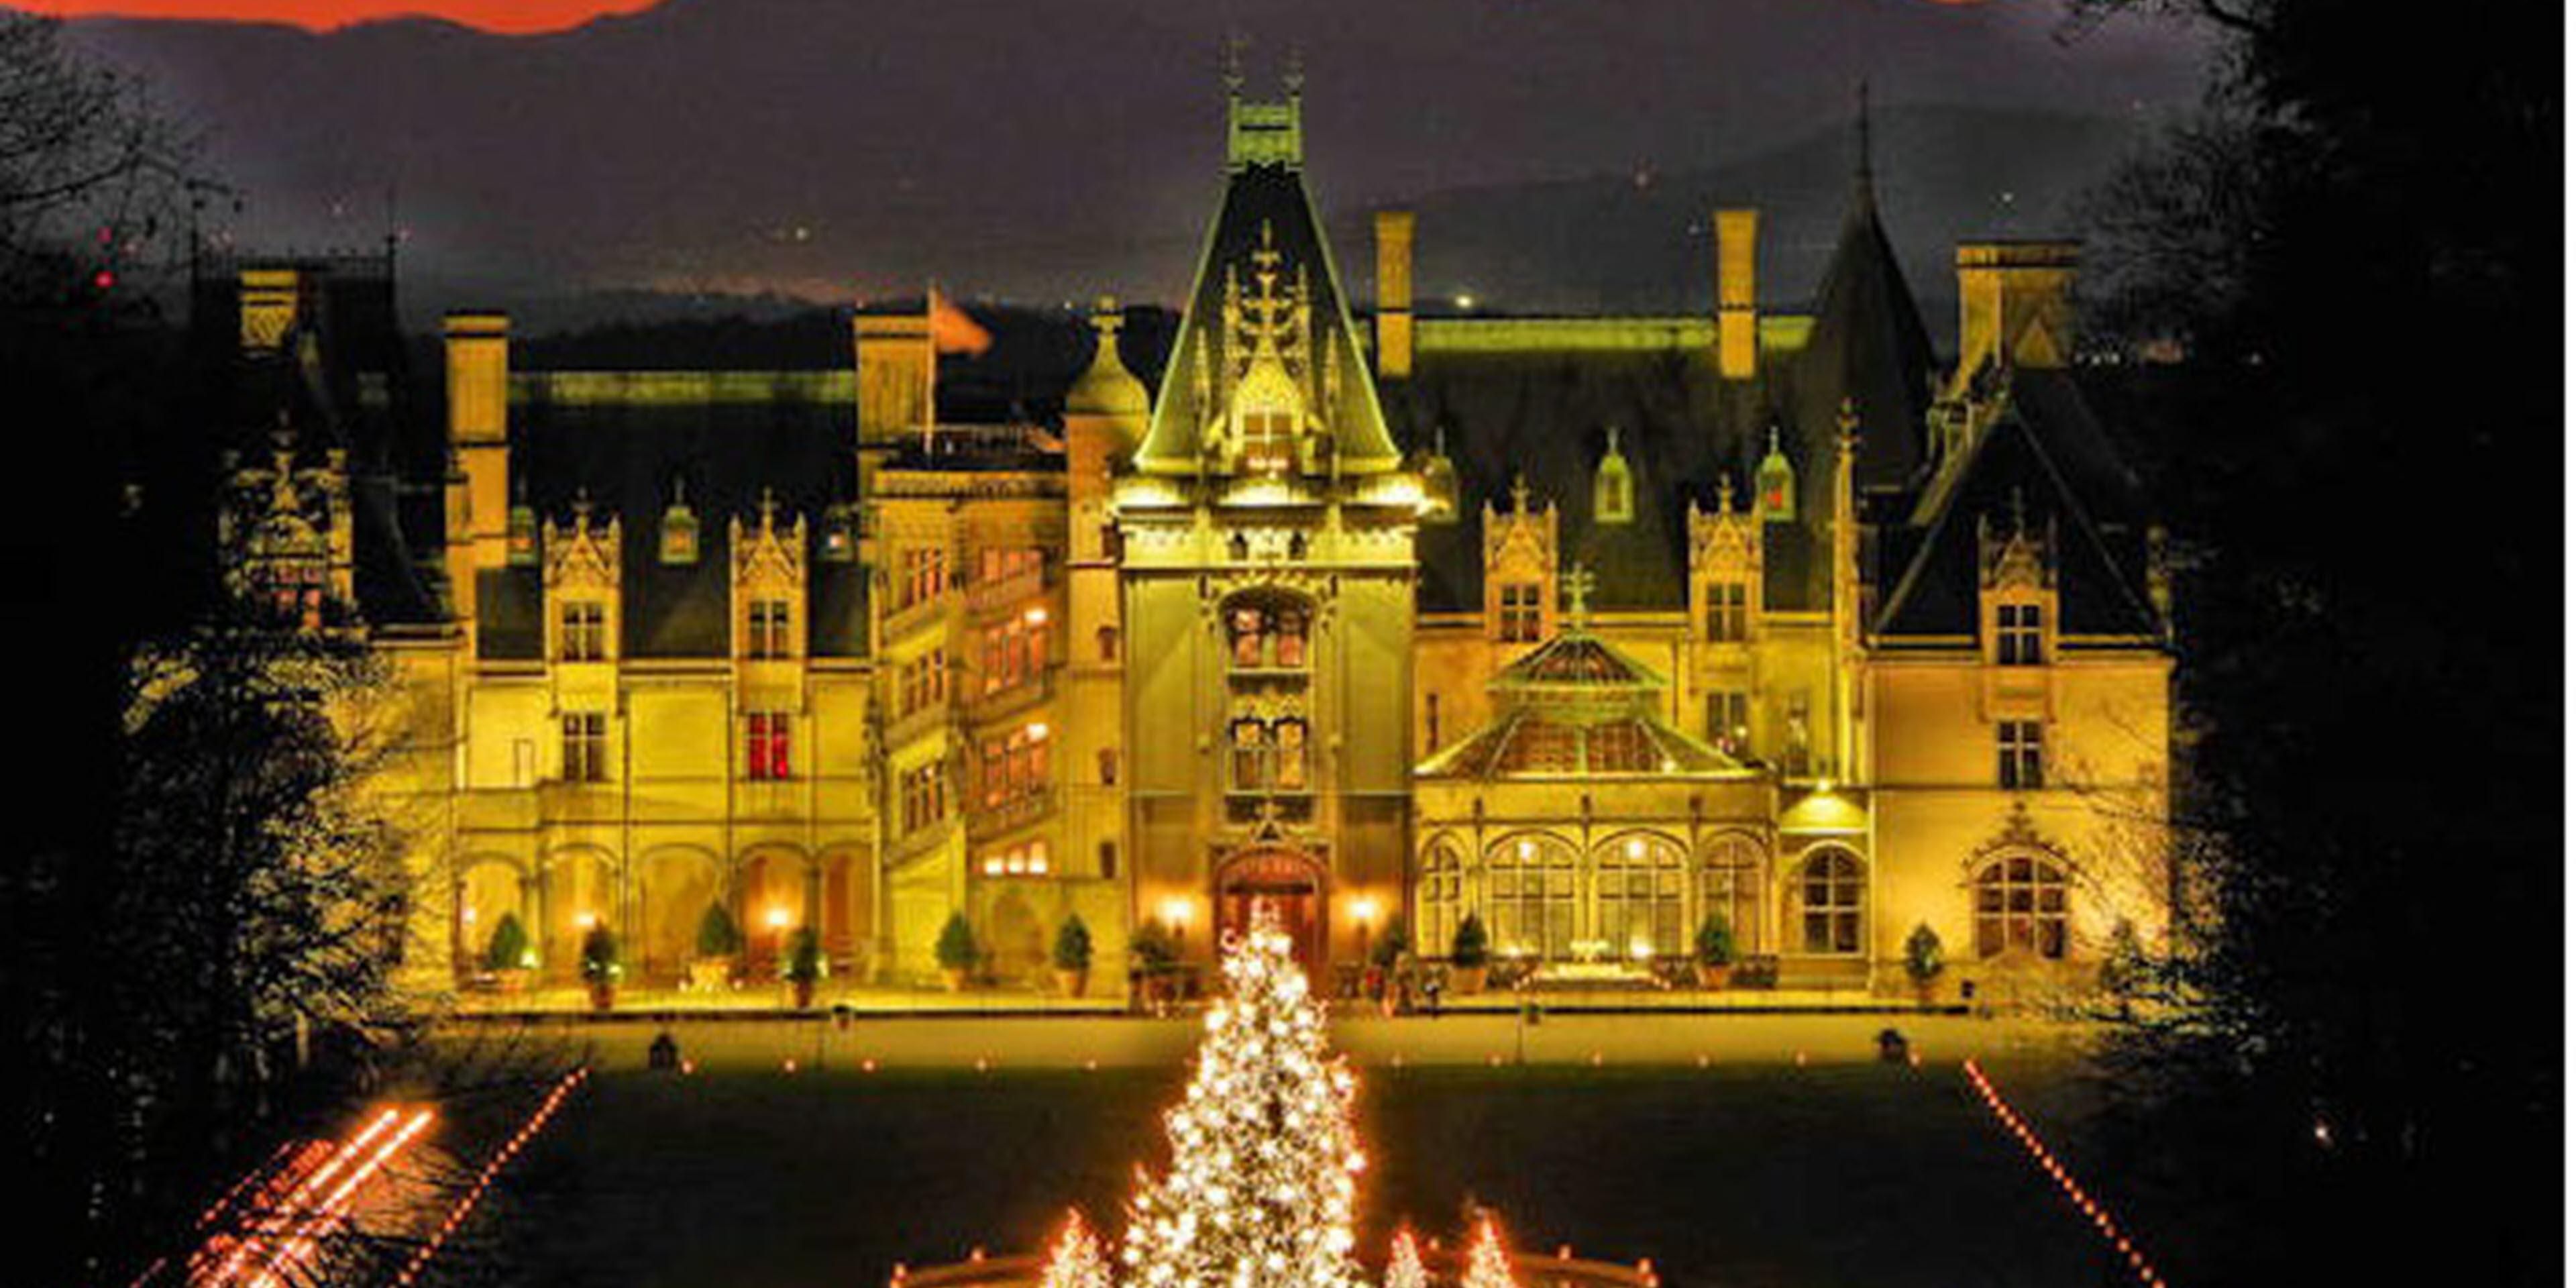 Holiday magic is calling your name! Plan your trip and visit the beautifully decorated Biltmore Estate during your next stay with us this holiday season. We're just 5 miles away so you can enjoy the best of Asheville with our top amenities so it feels like home. Plus, reach out to our front desk for information on discounted tickets.